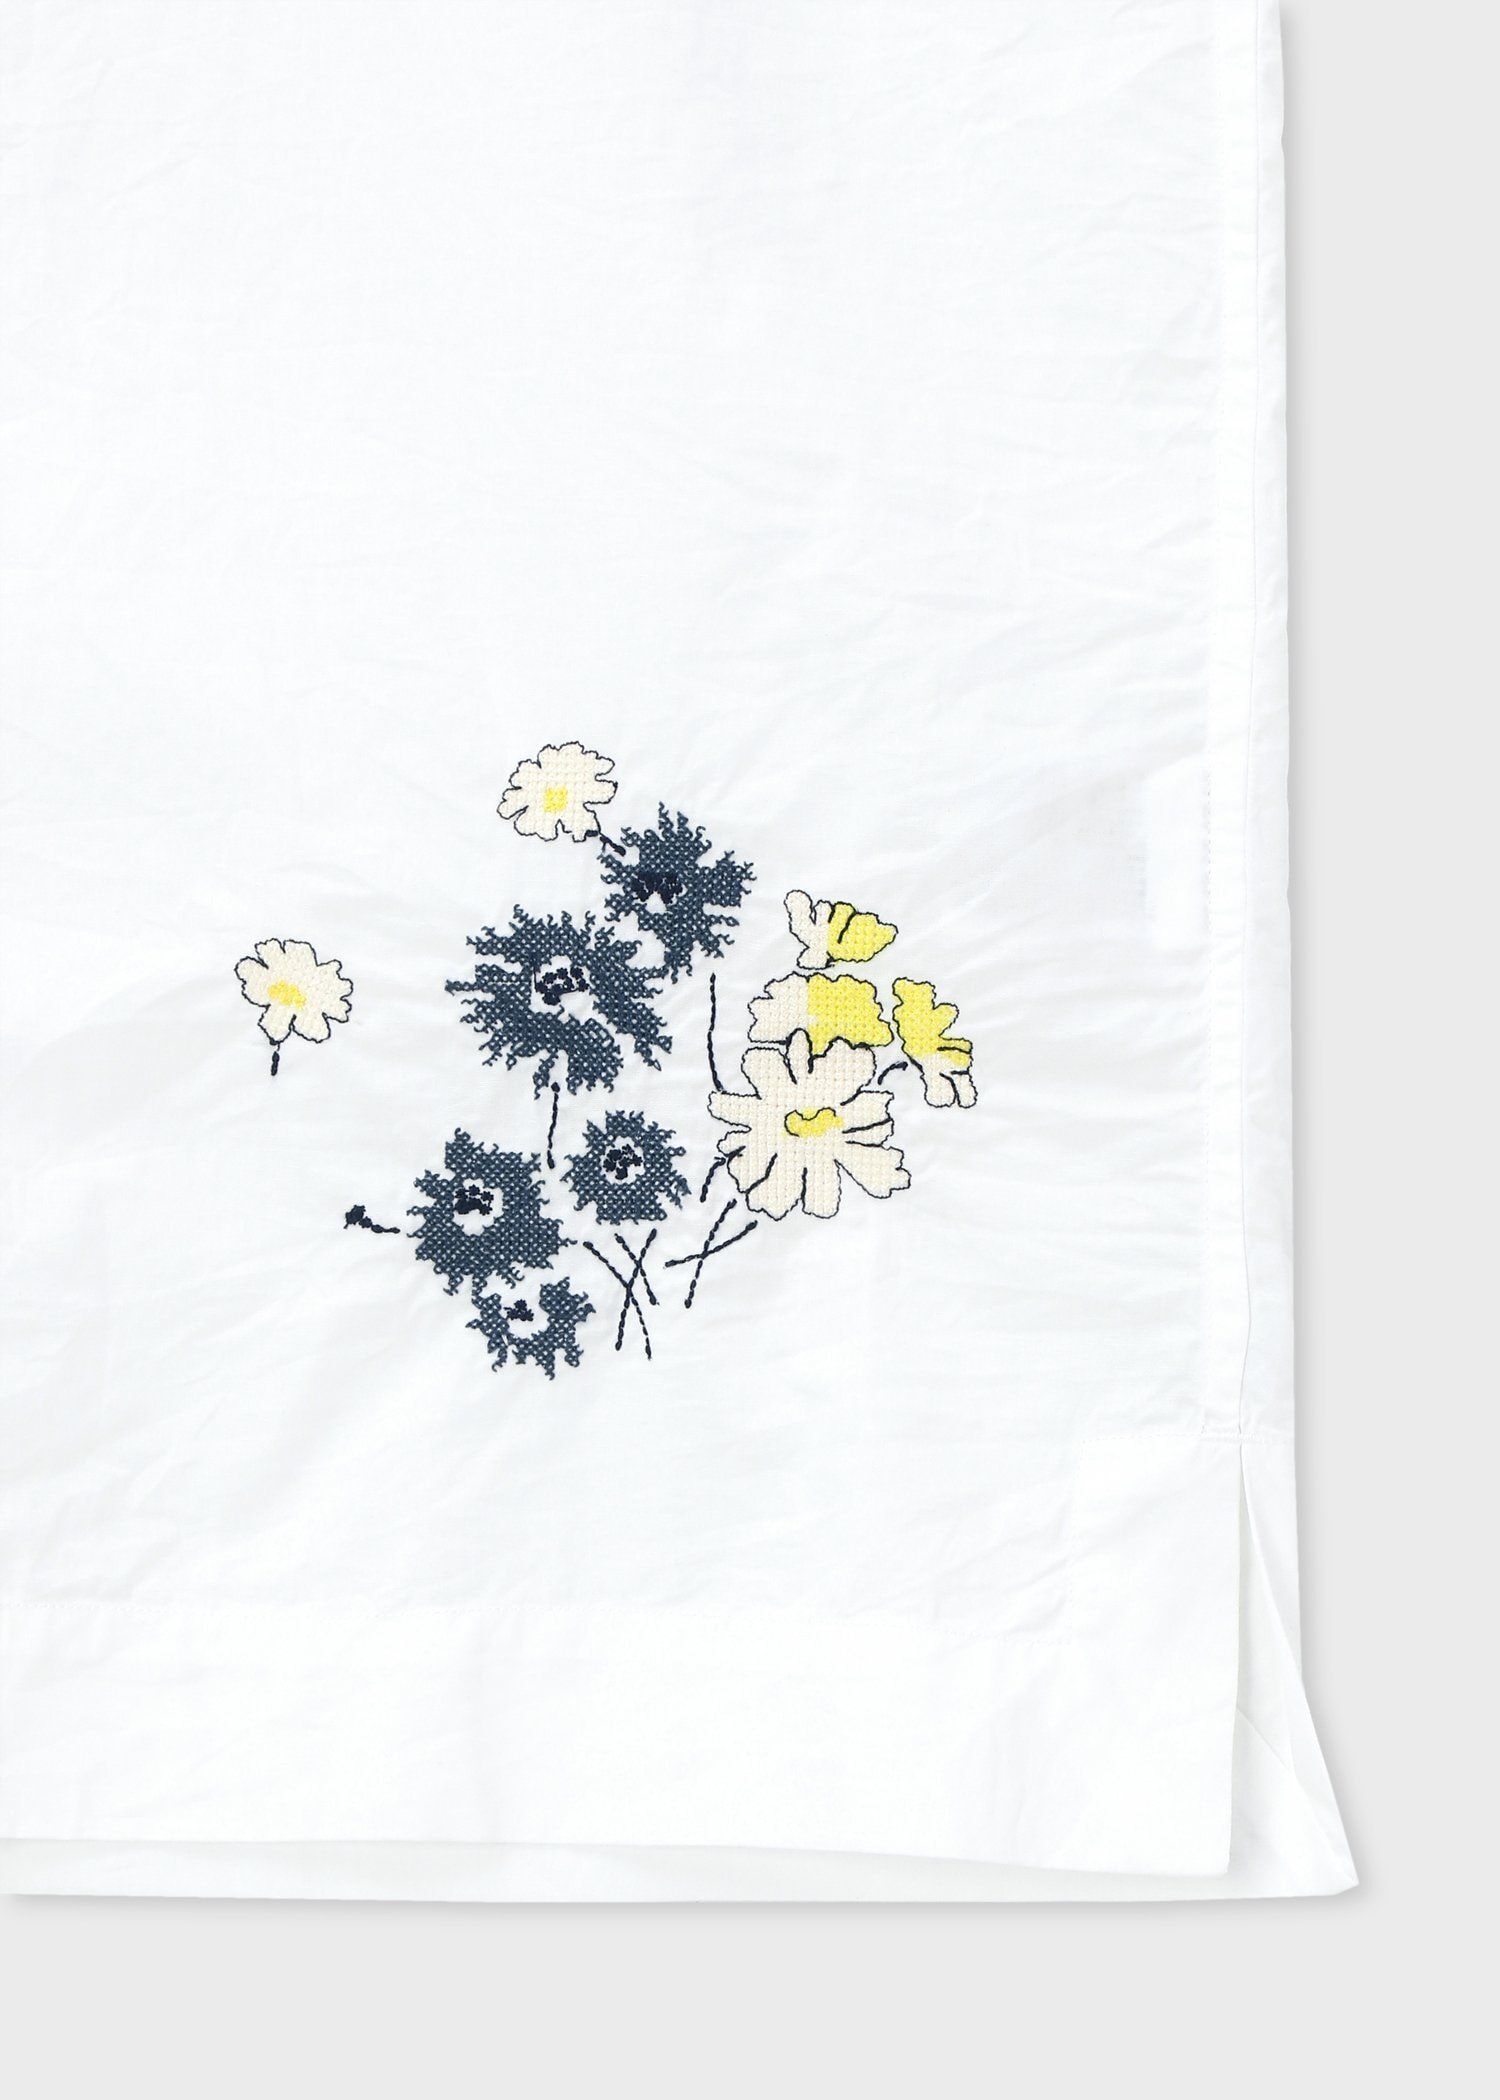 "Floral embroidery" オープンカラーシャツ